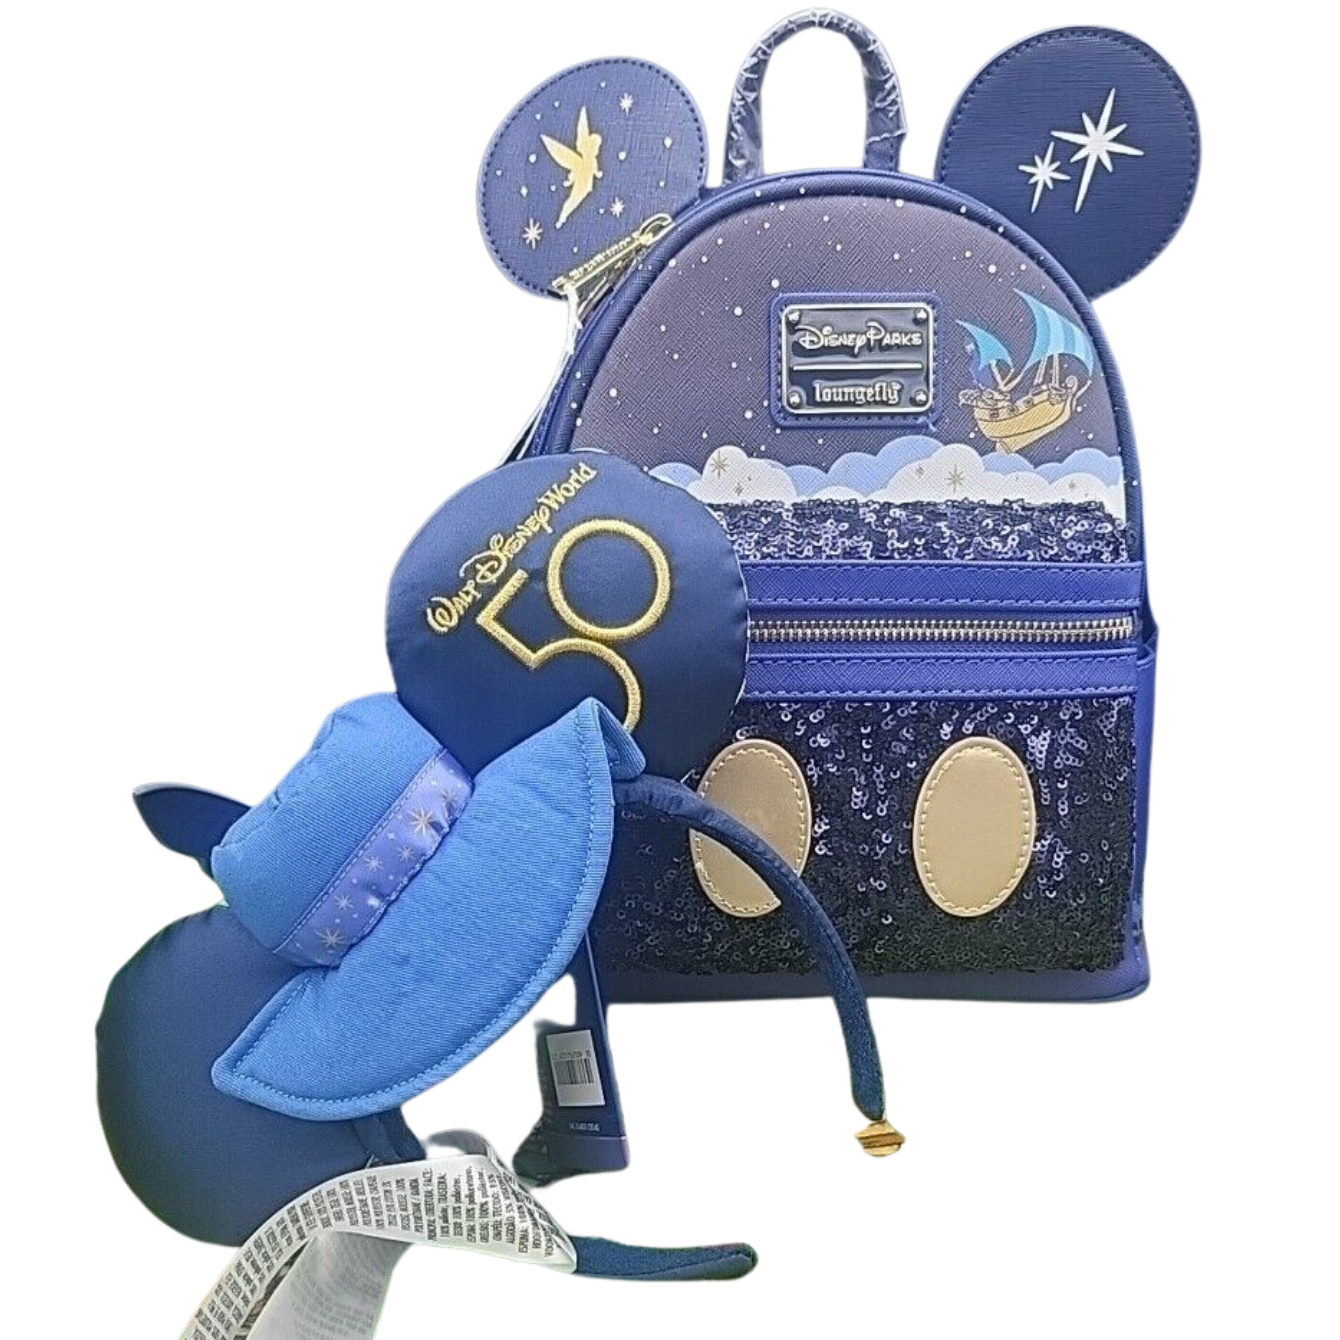 Loungefly Disney Parks Mickey Mouse Main Attraction Mini Backpack PETER PAN